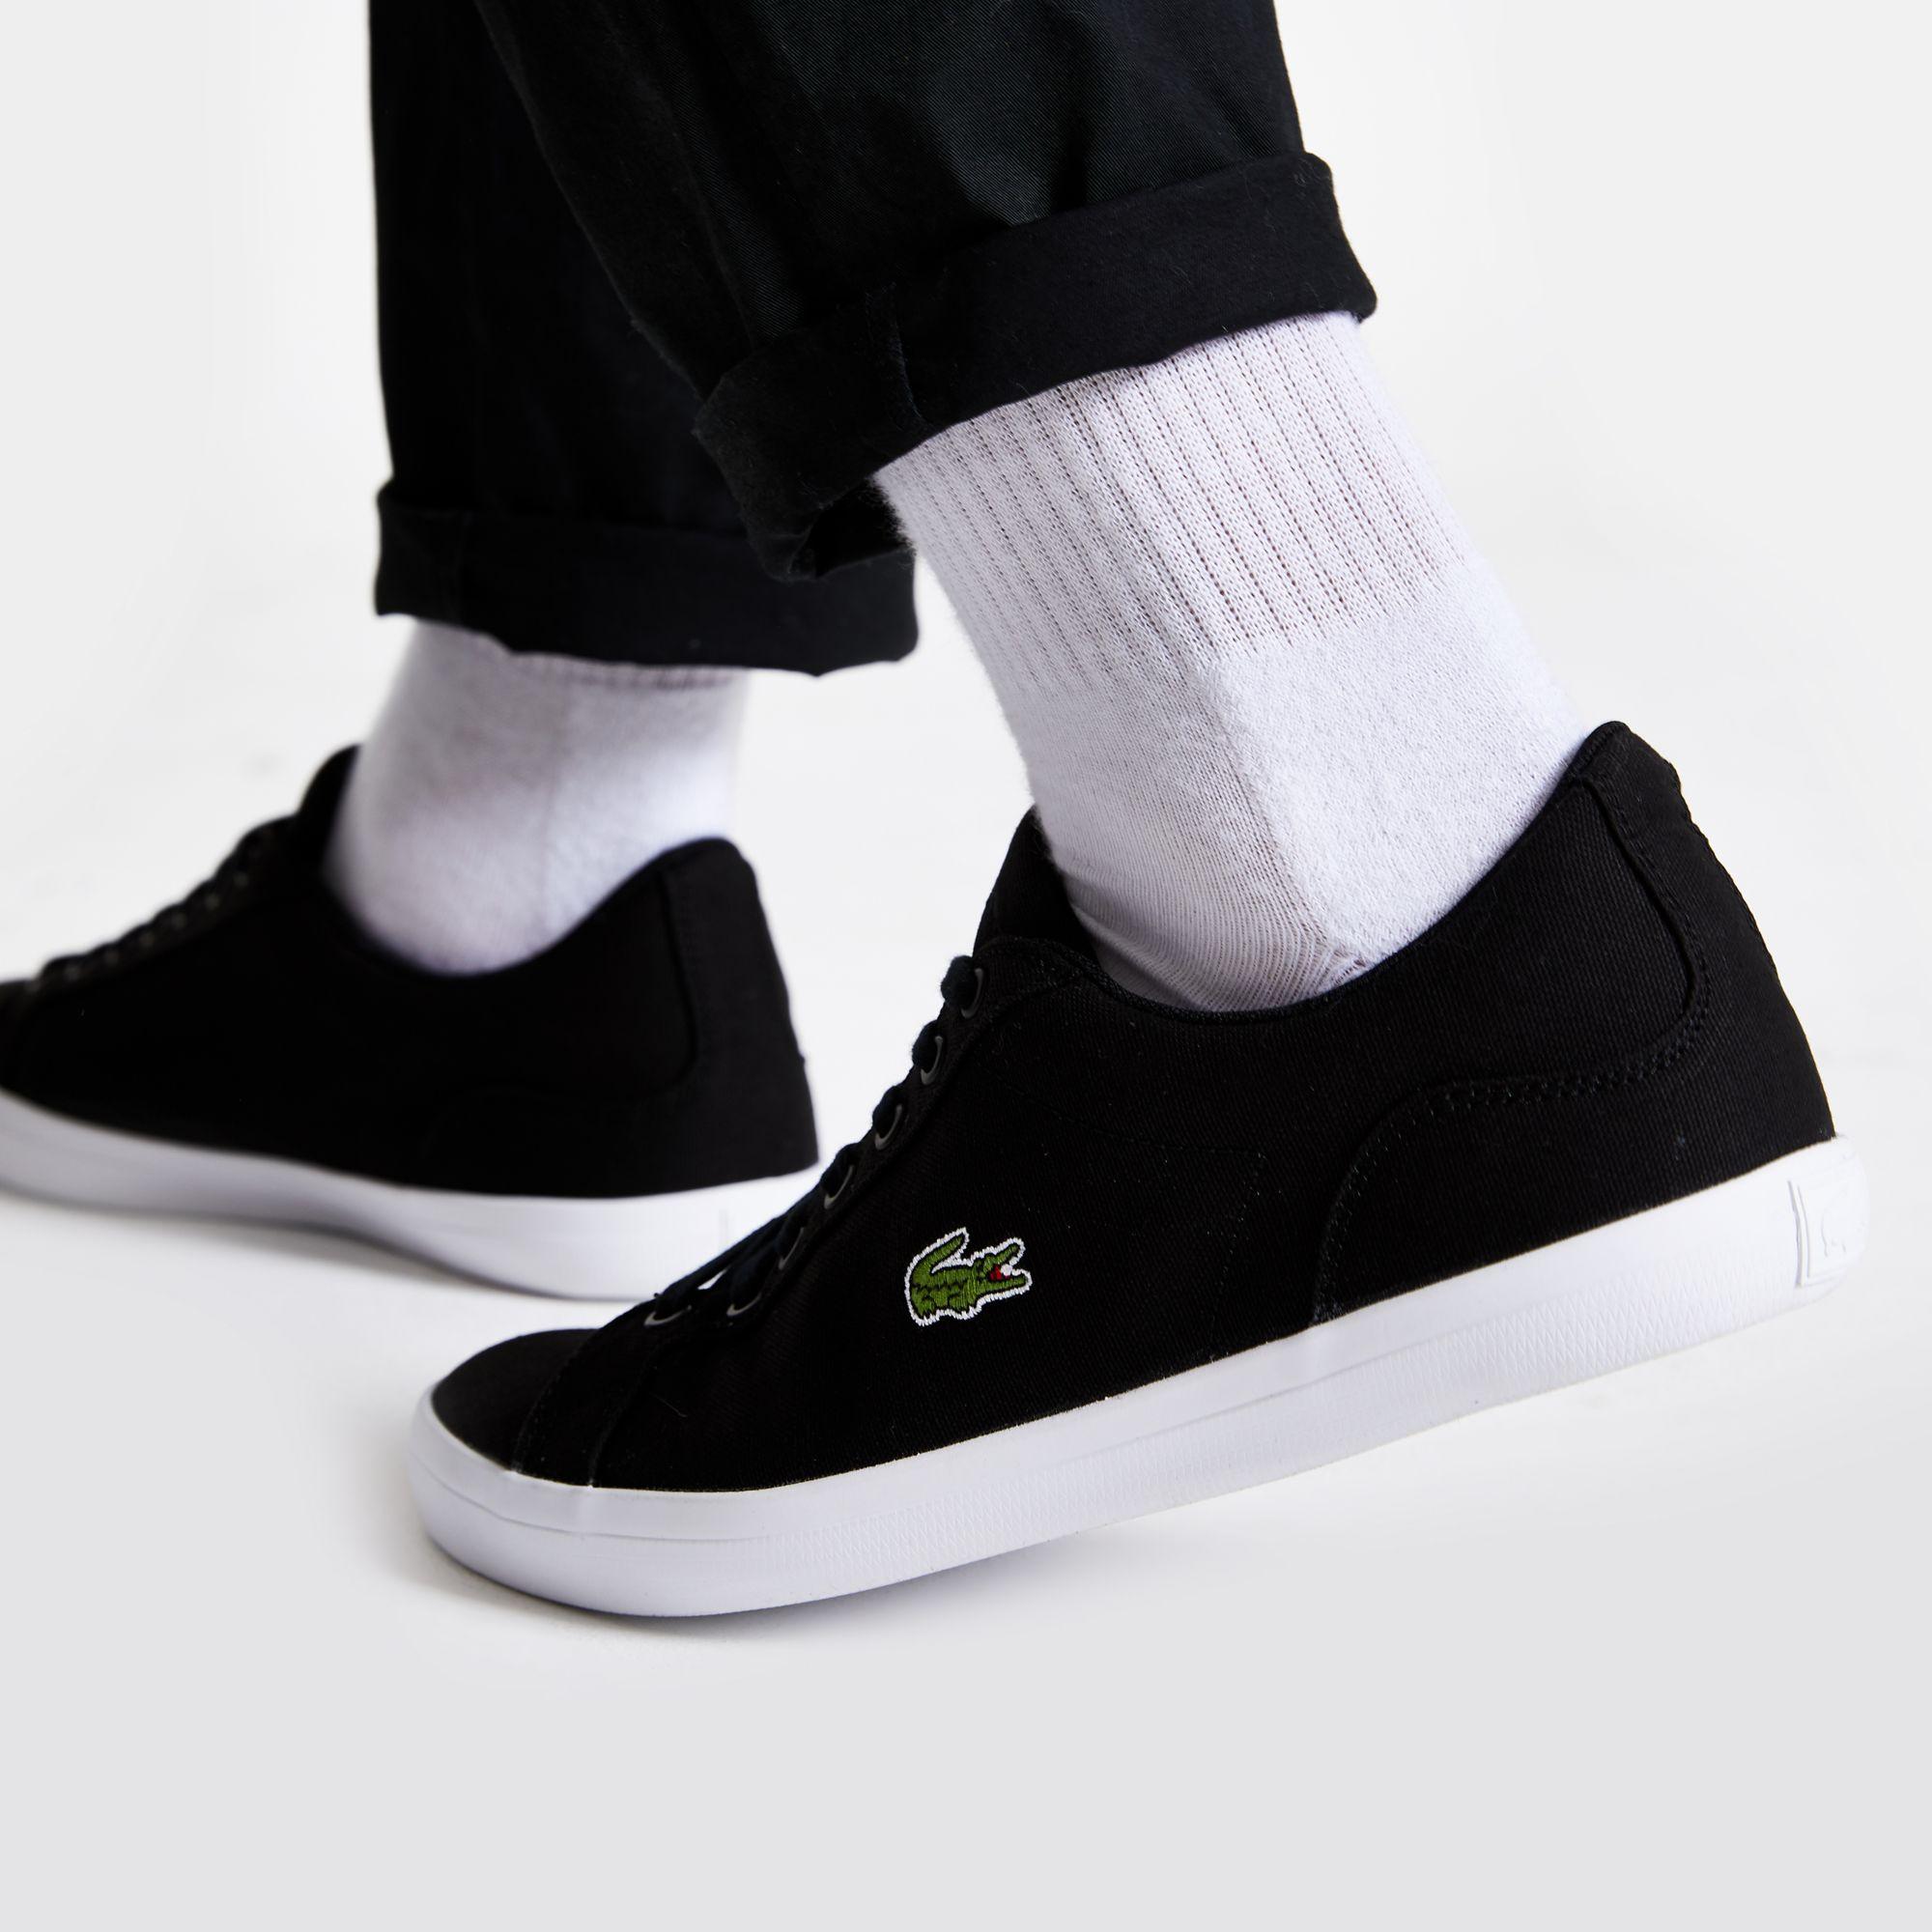 River Island Lacoste Black Lerond Canvas Trainers for Men - Lyst